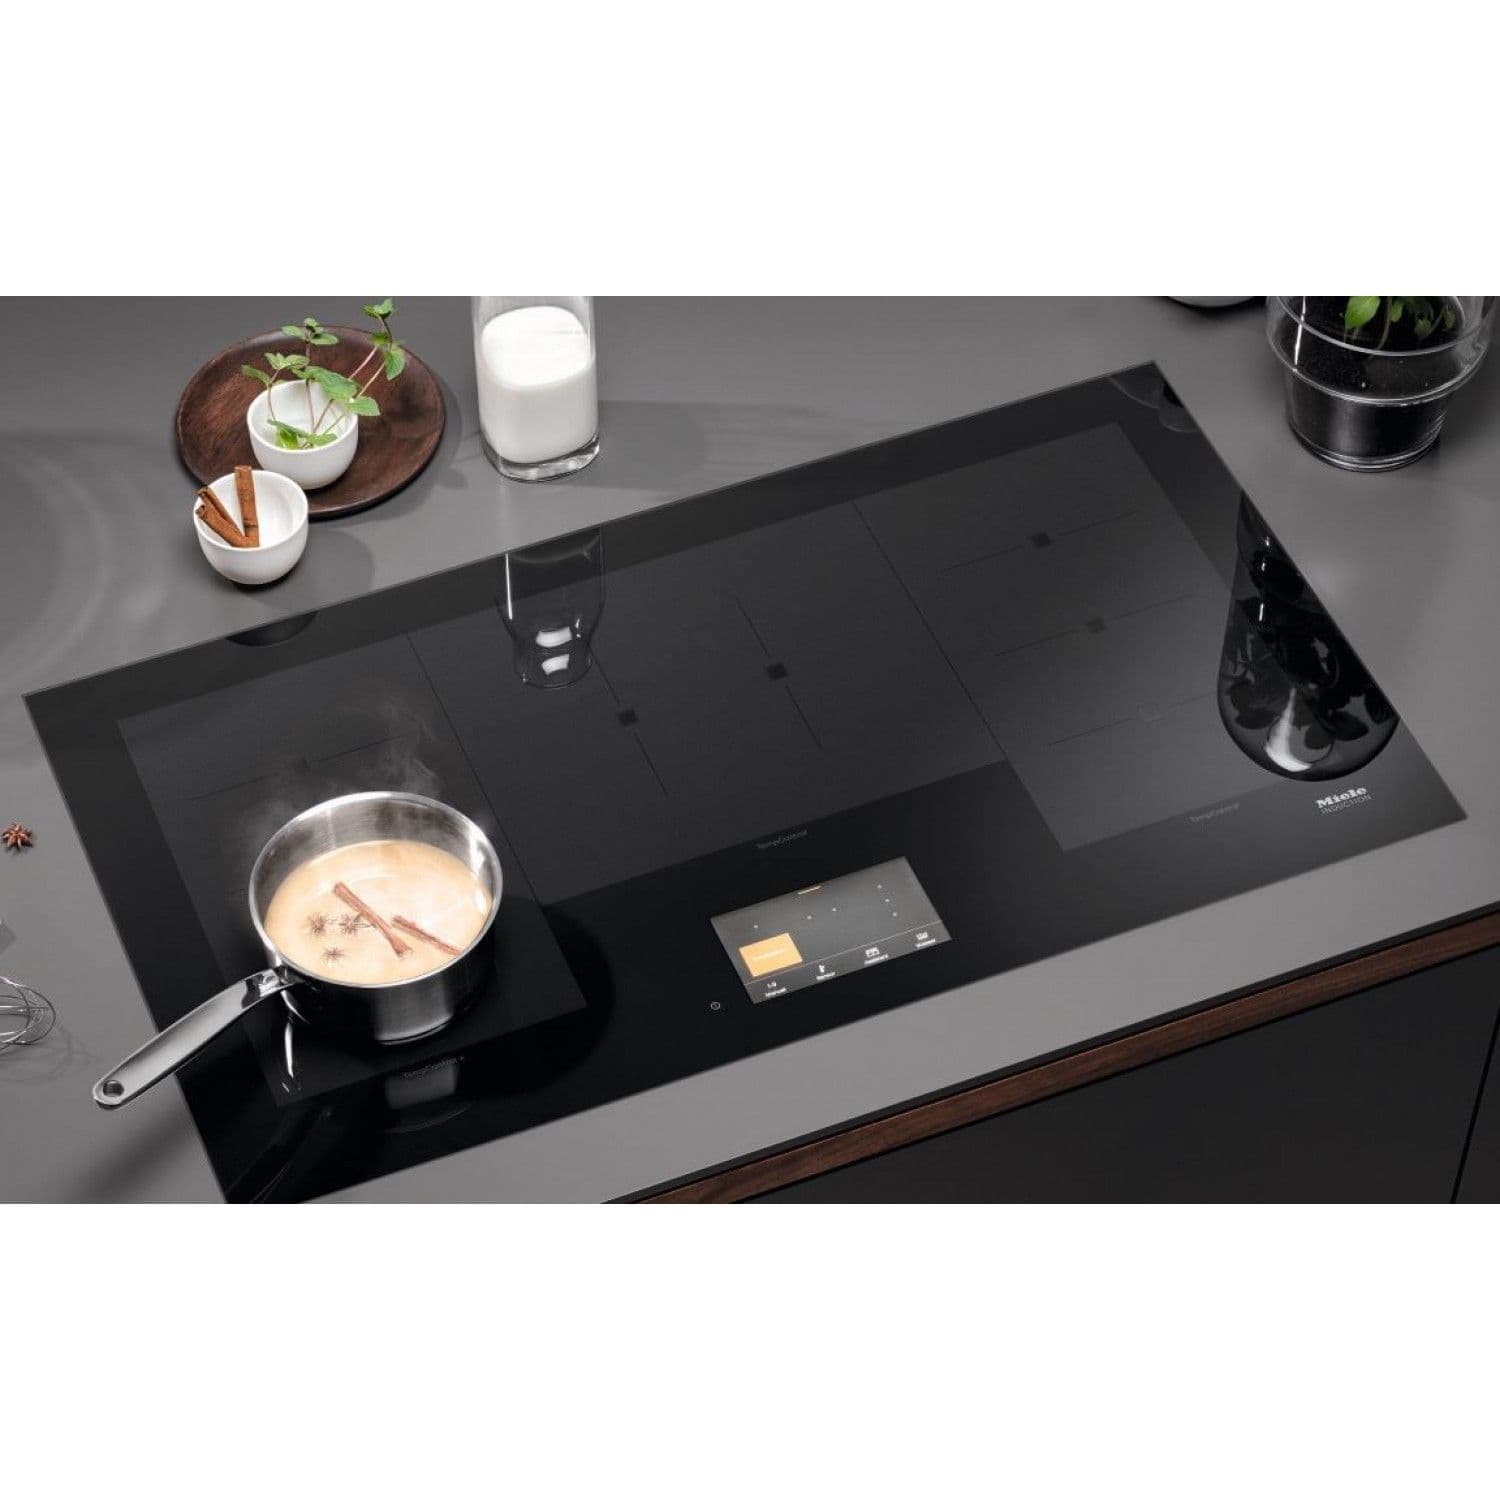 Miele 93cm 3 Cooking Areas Induction Hob KM 7999 FL Black Glass Finish